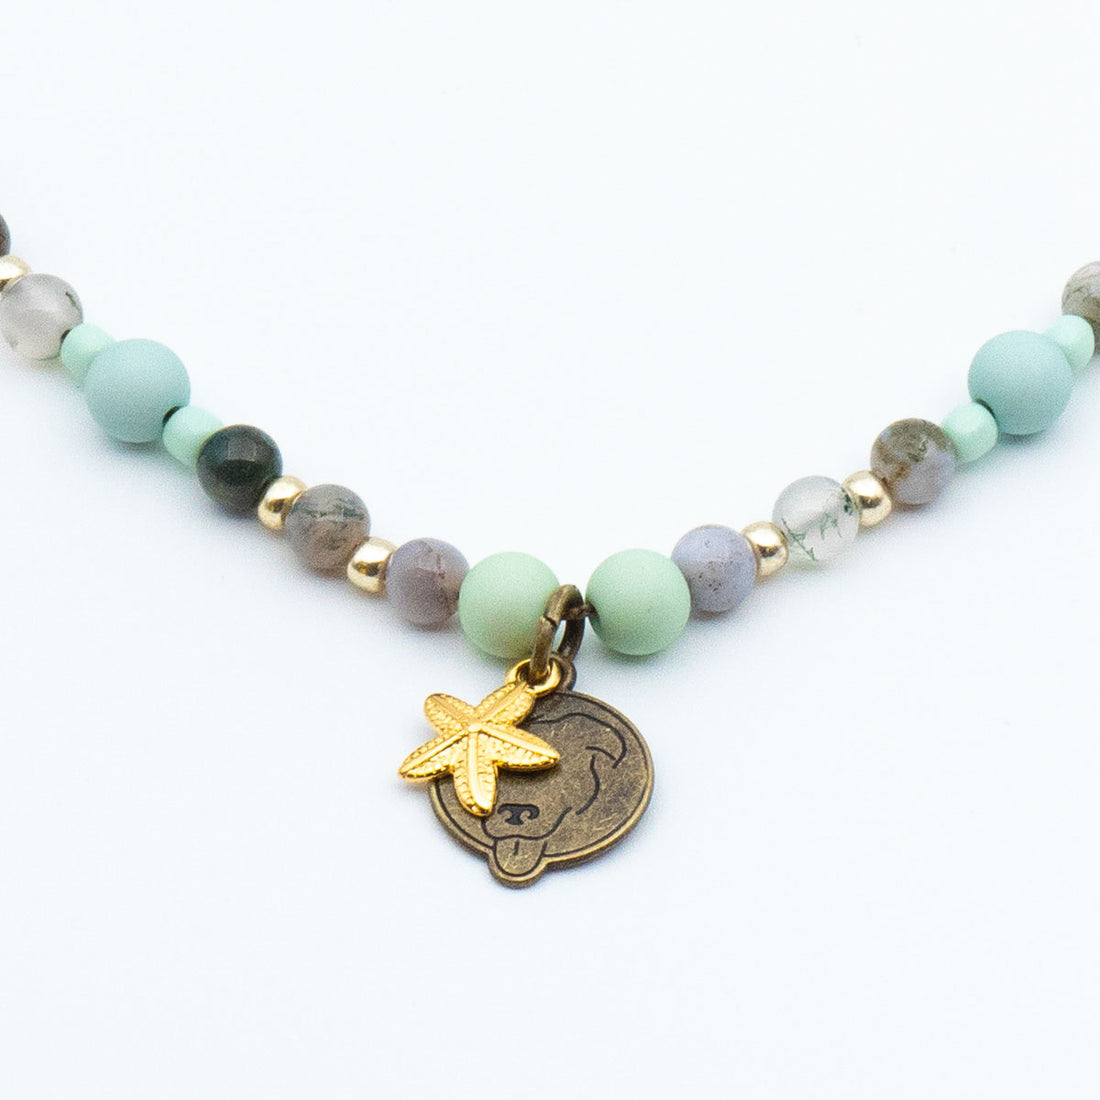 Dog necklace healing stones - Cove (moss agate)